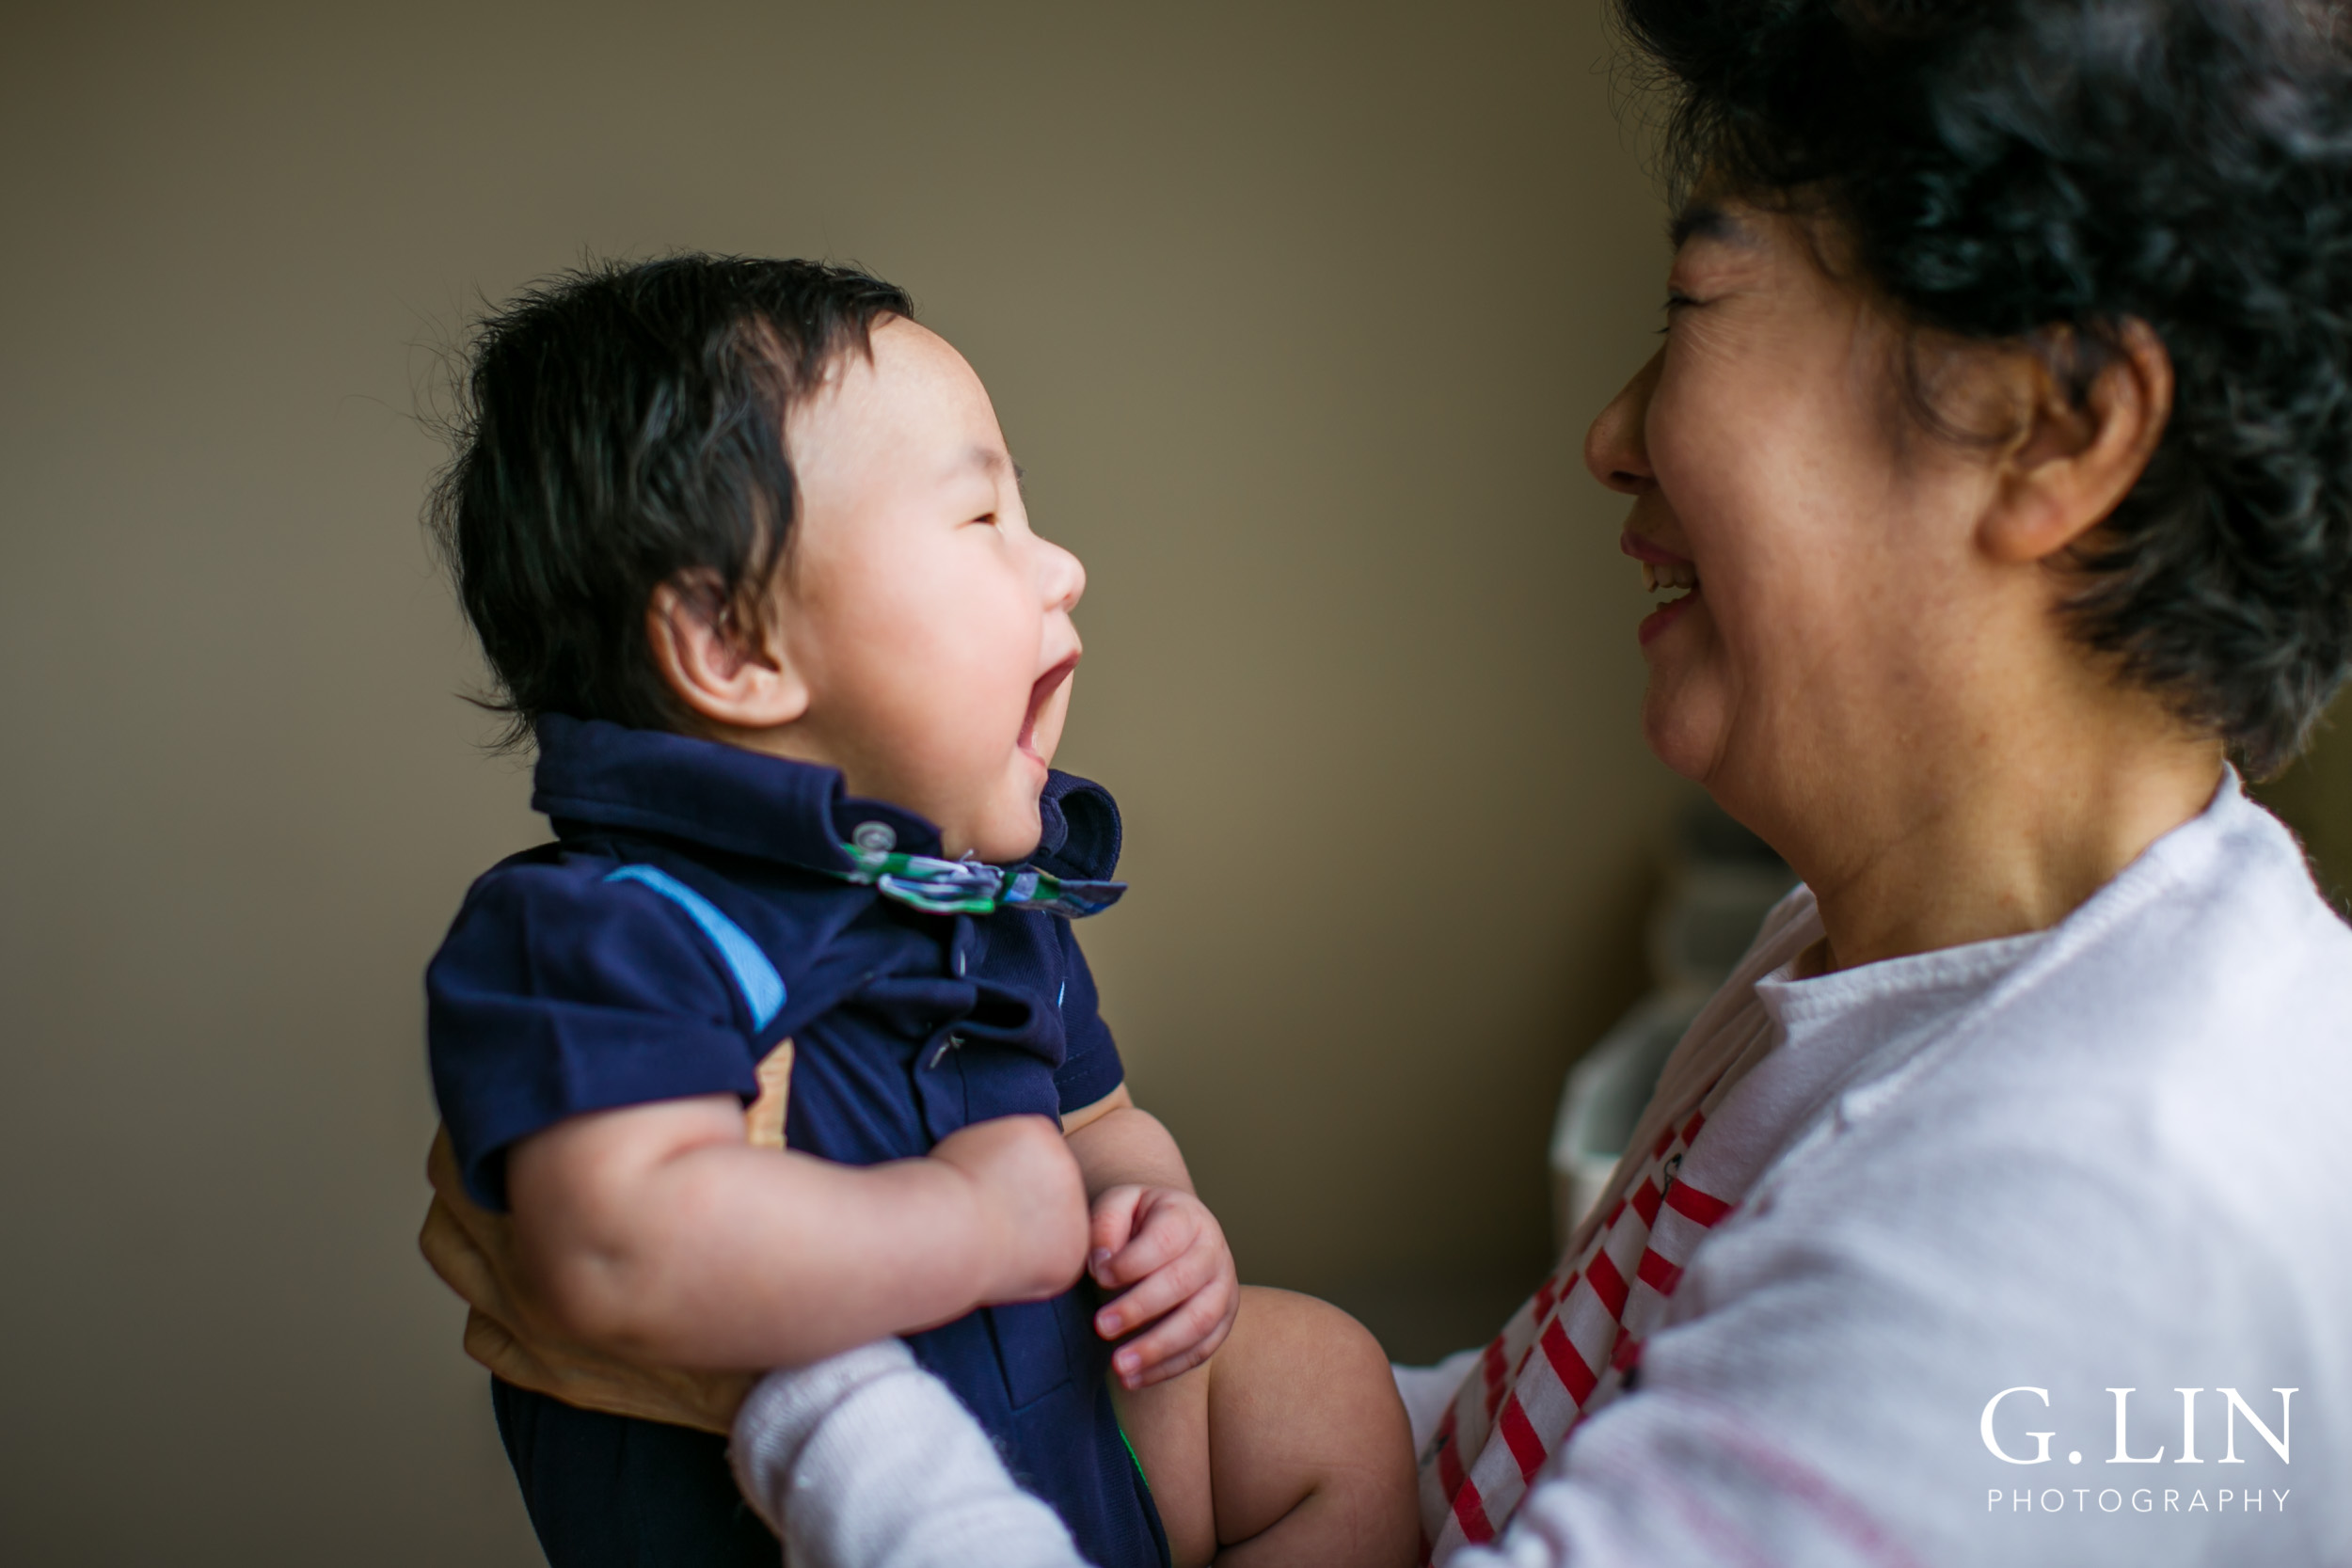 Durham Family Photographer | G. Lin Photography | Baby and grandma at home laughing together